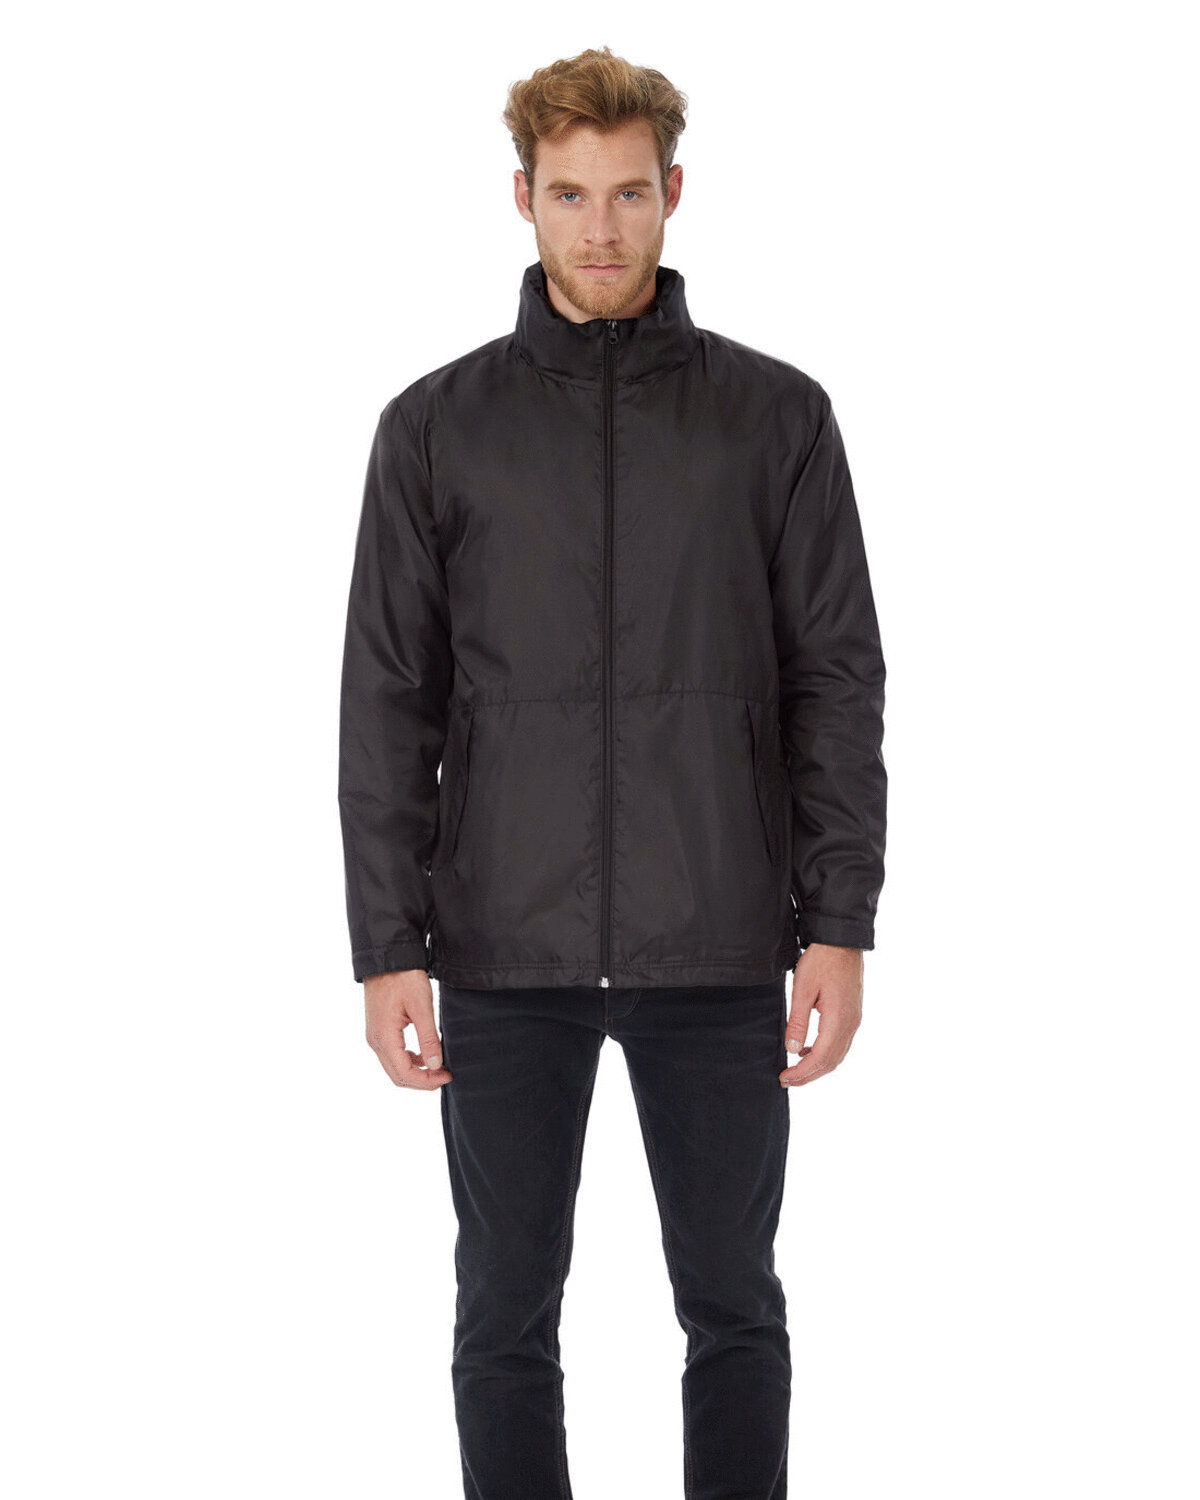 MENS MULTI-ACTIVE MIDDLEWEIGHT JACKET